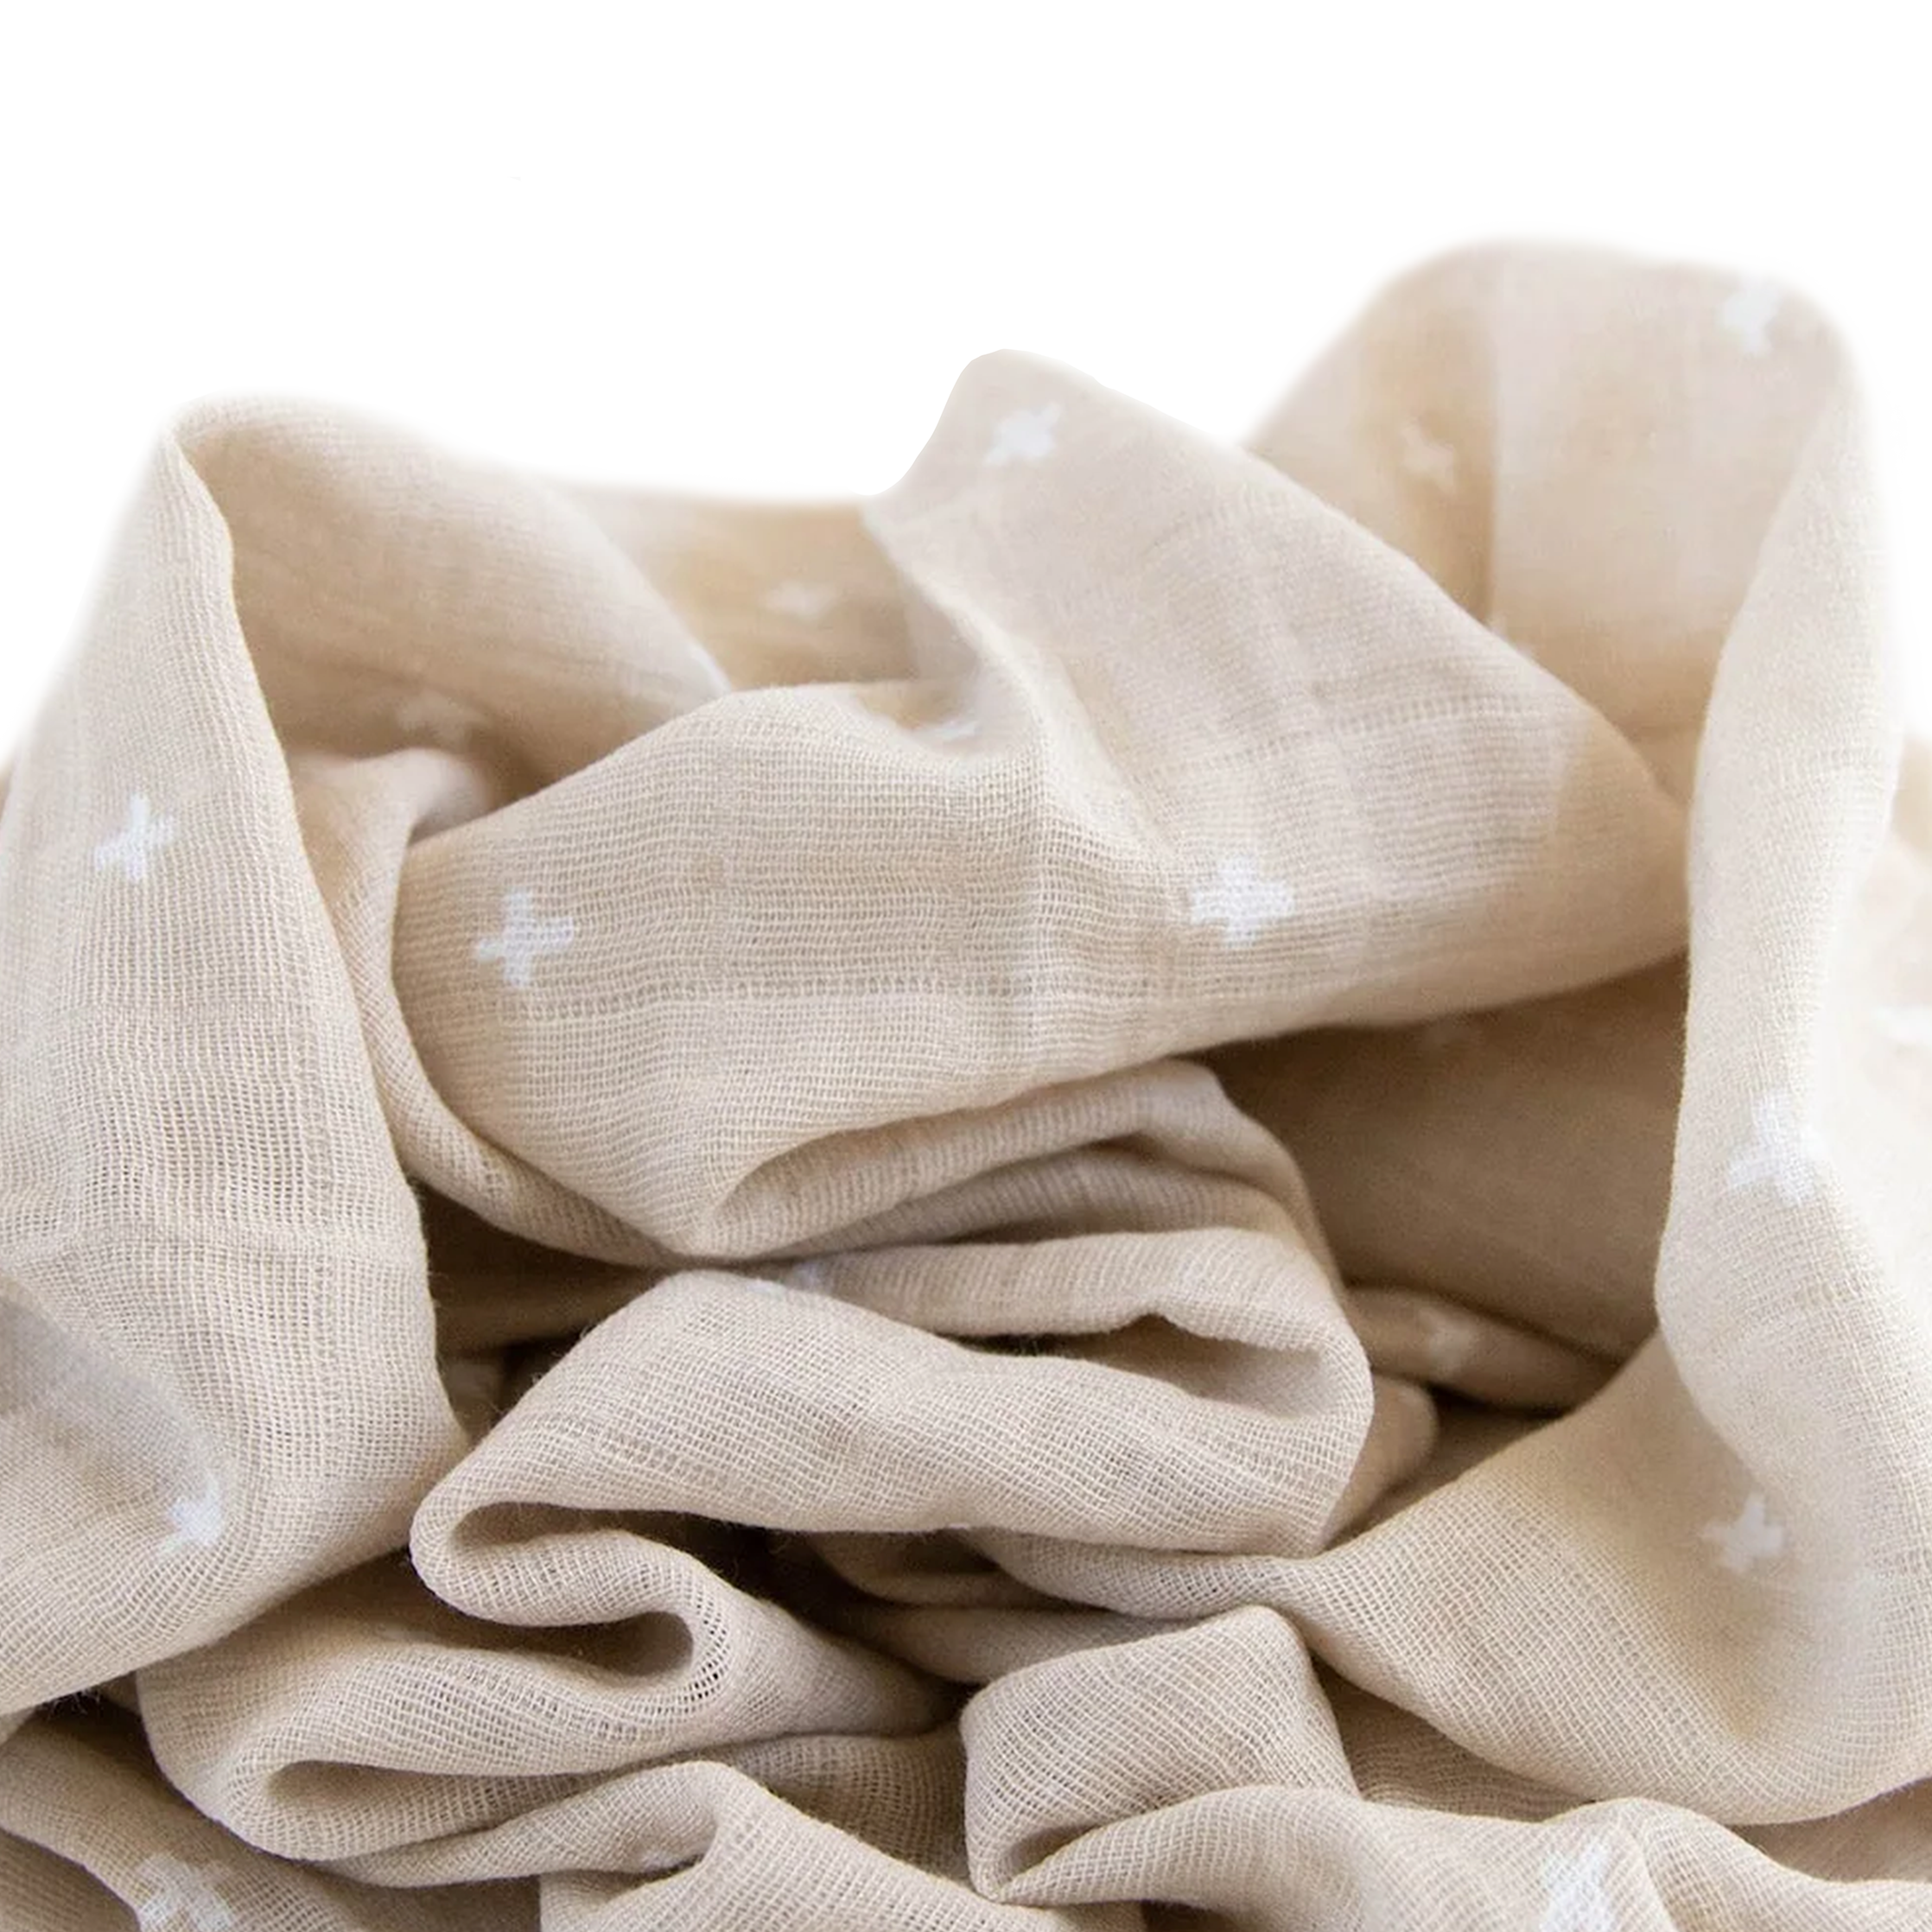 Cotton Muslin Swaddle Blanket - Taupe Cross